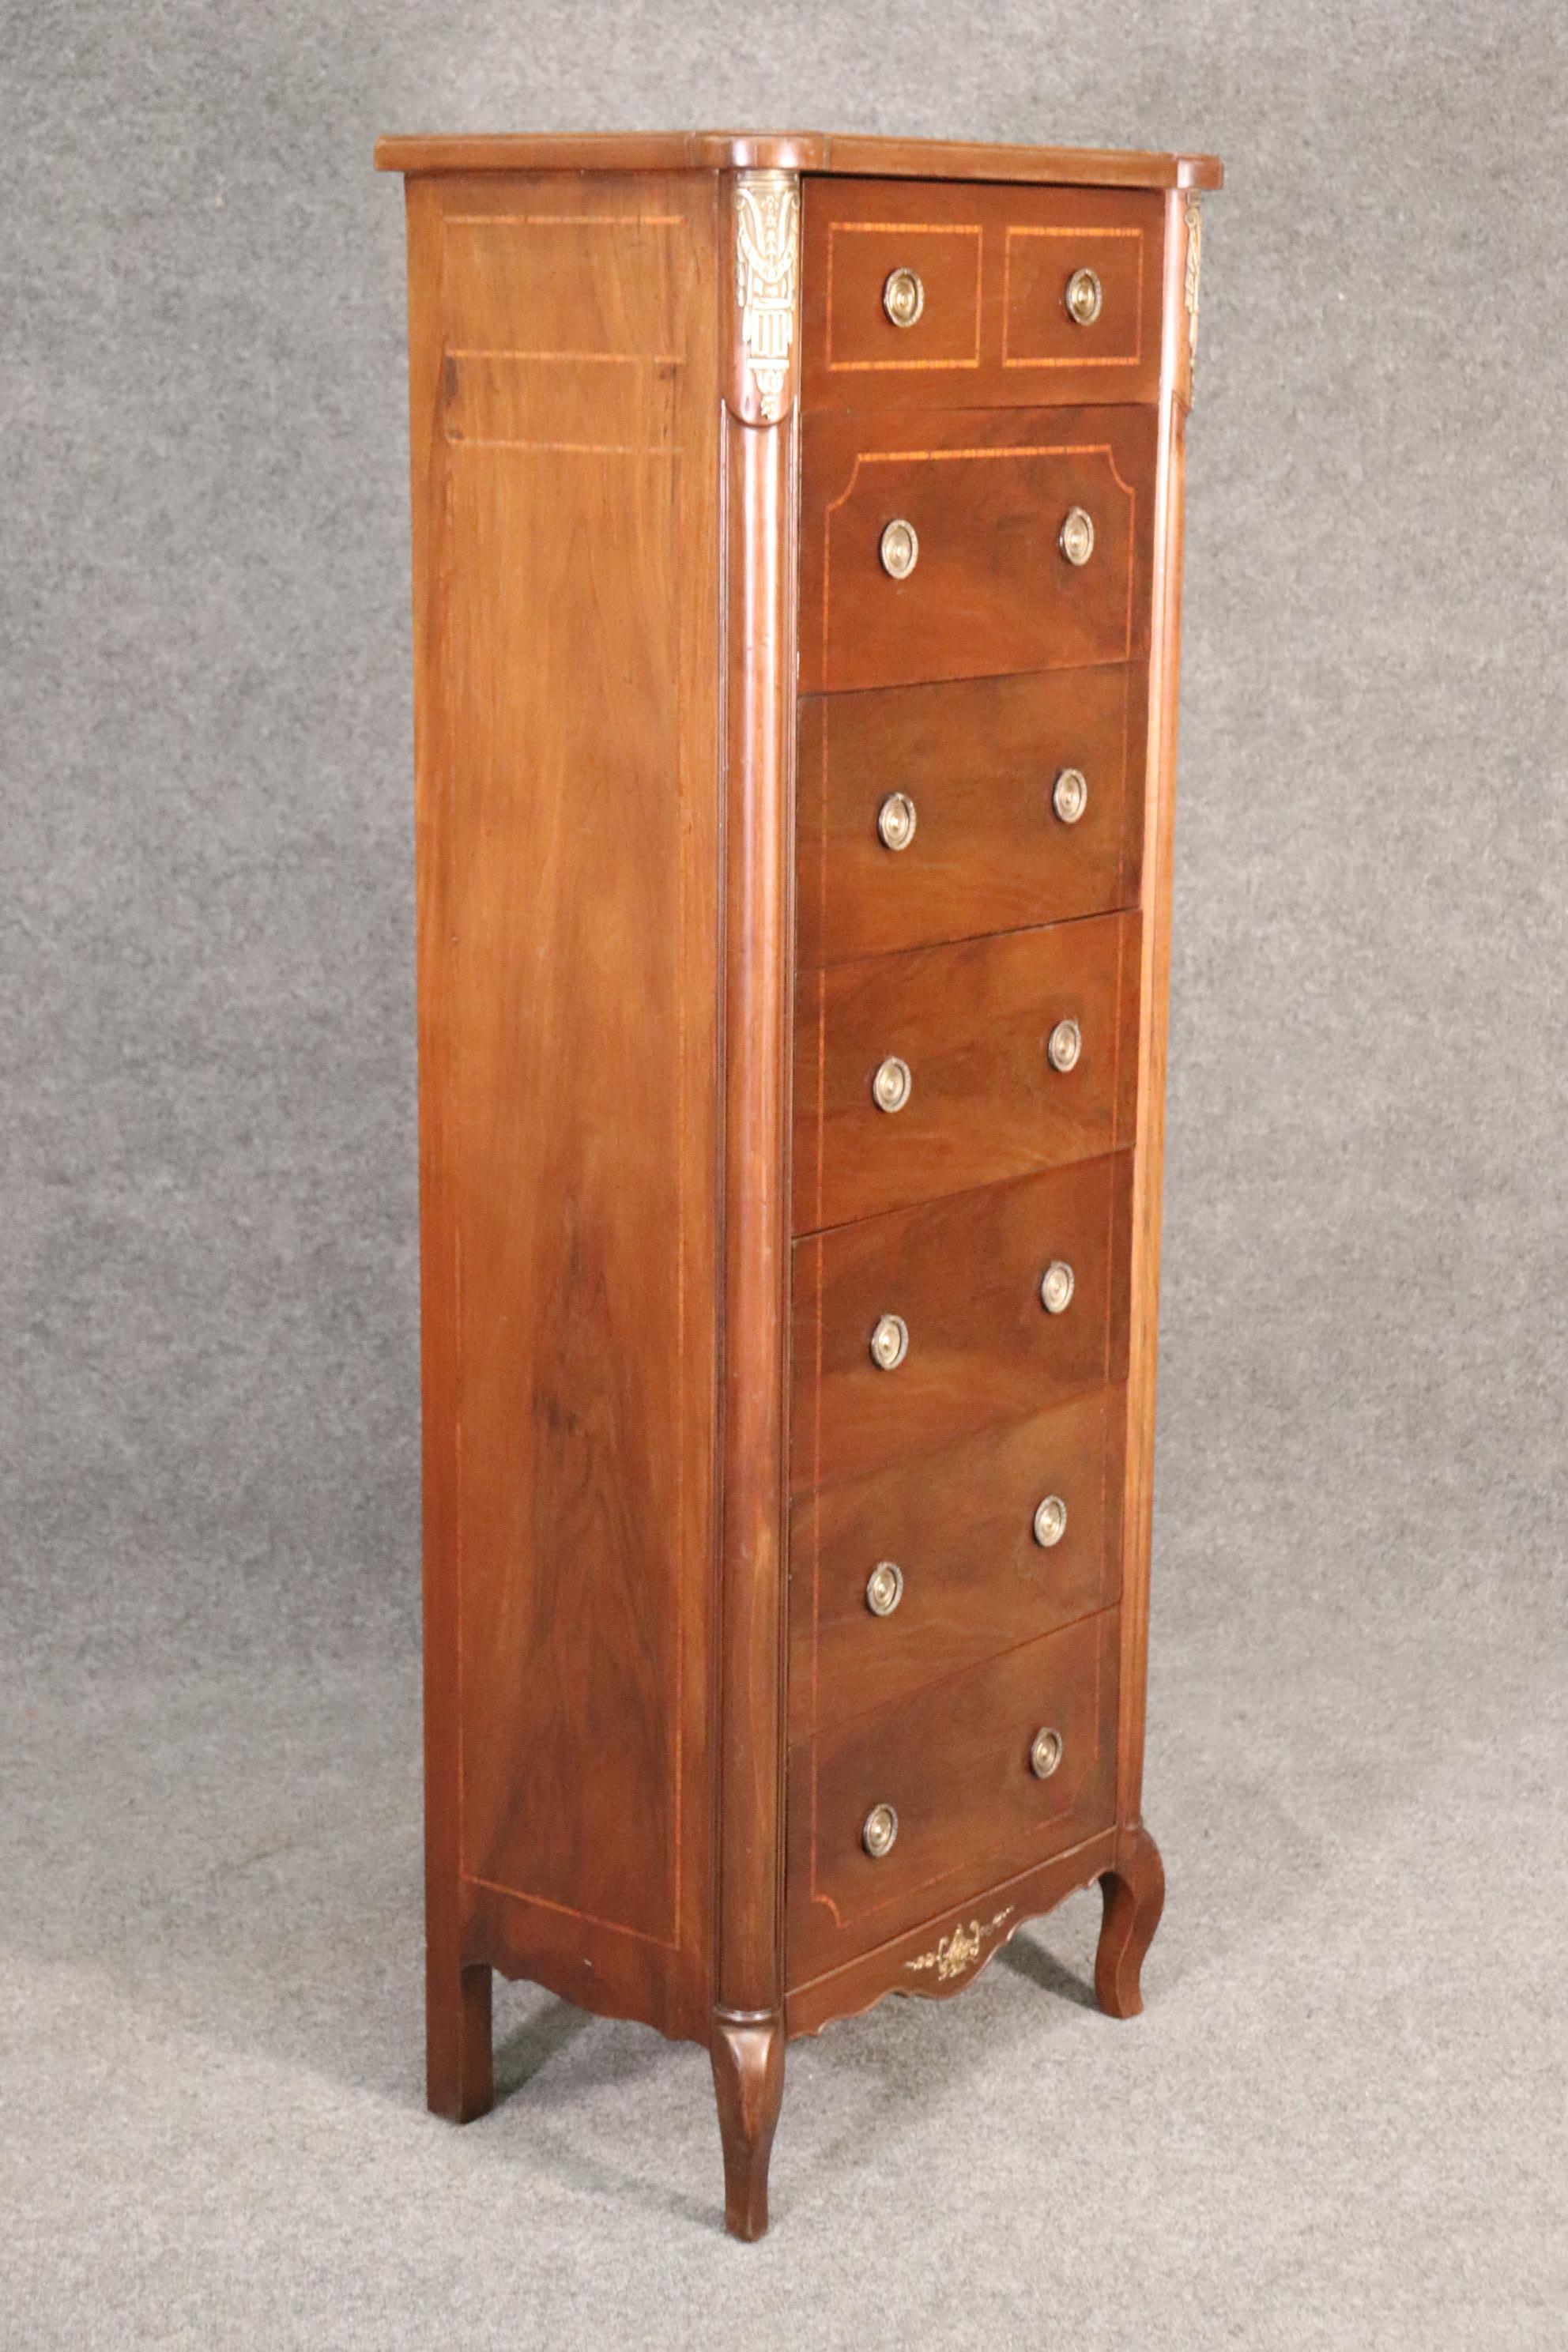 This is a very tall and useful lingerie chest. The chest is designed in the Louis XV style and in good condition with bronze mounts. The lingerie chest measures 63 tall x 24 wide x 16 deep.